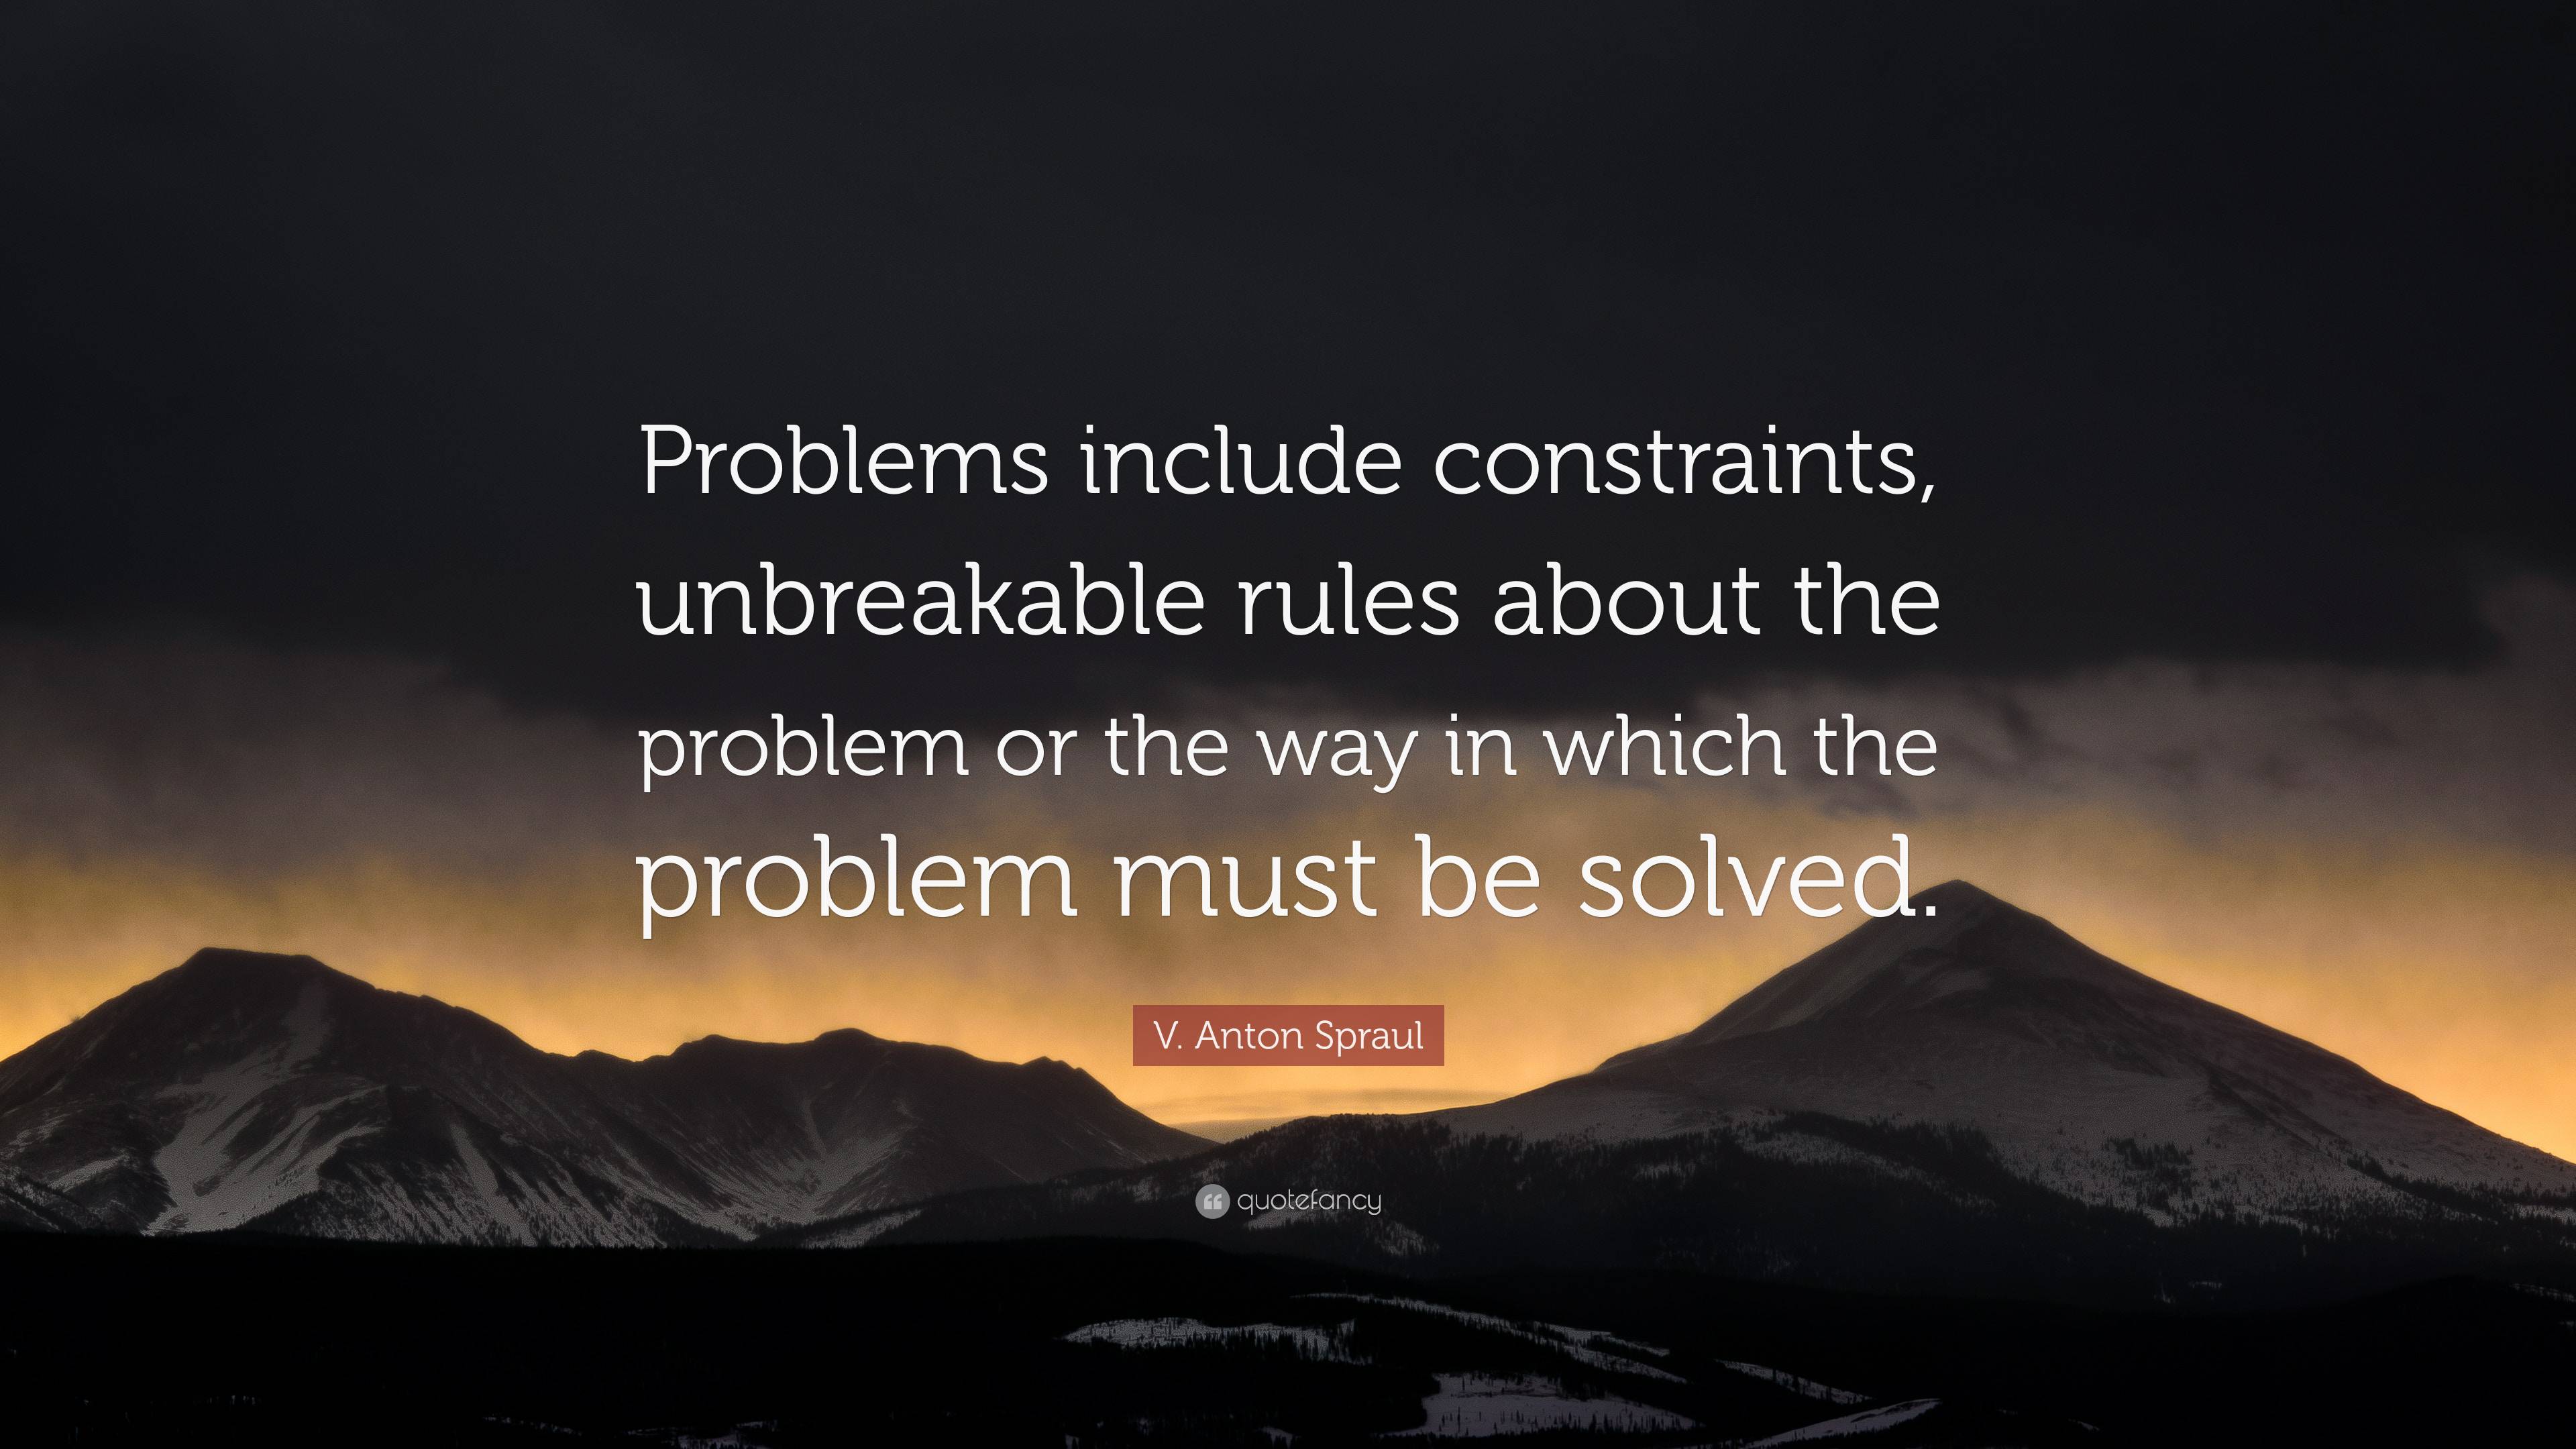 V. Anton Spraul Quote: “Problems include constraints, unbreakable rules ...